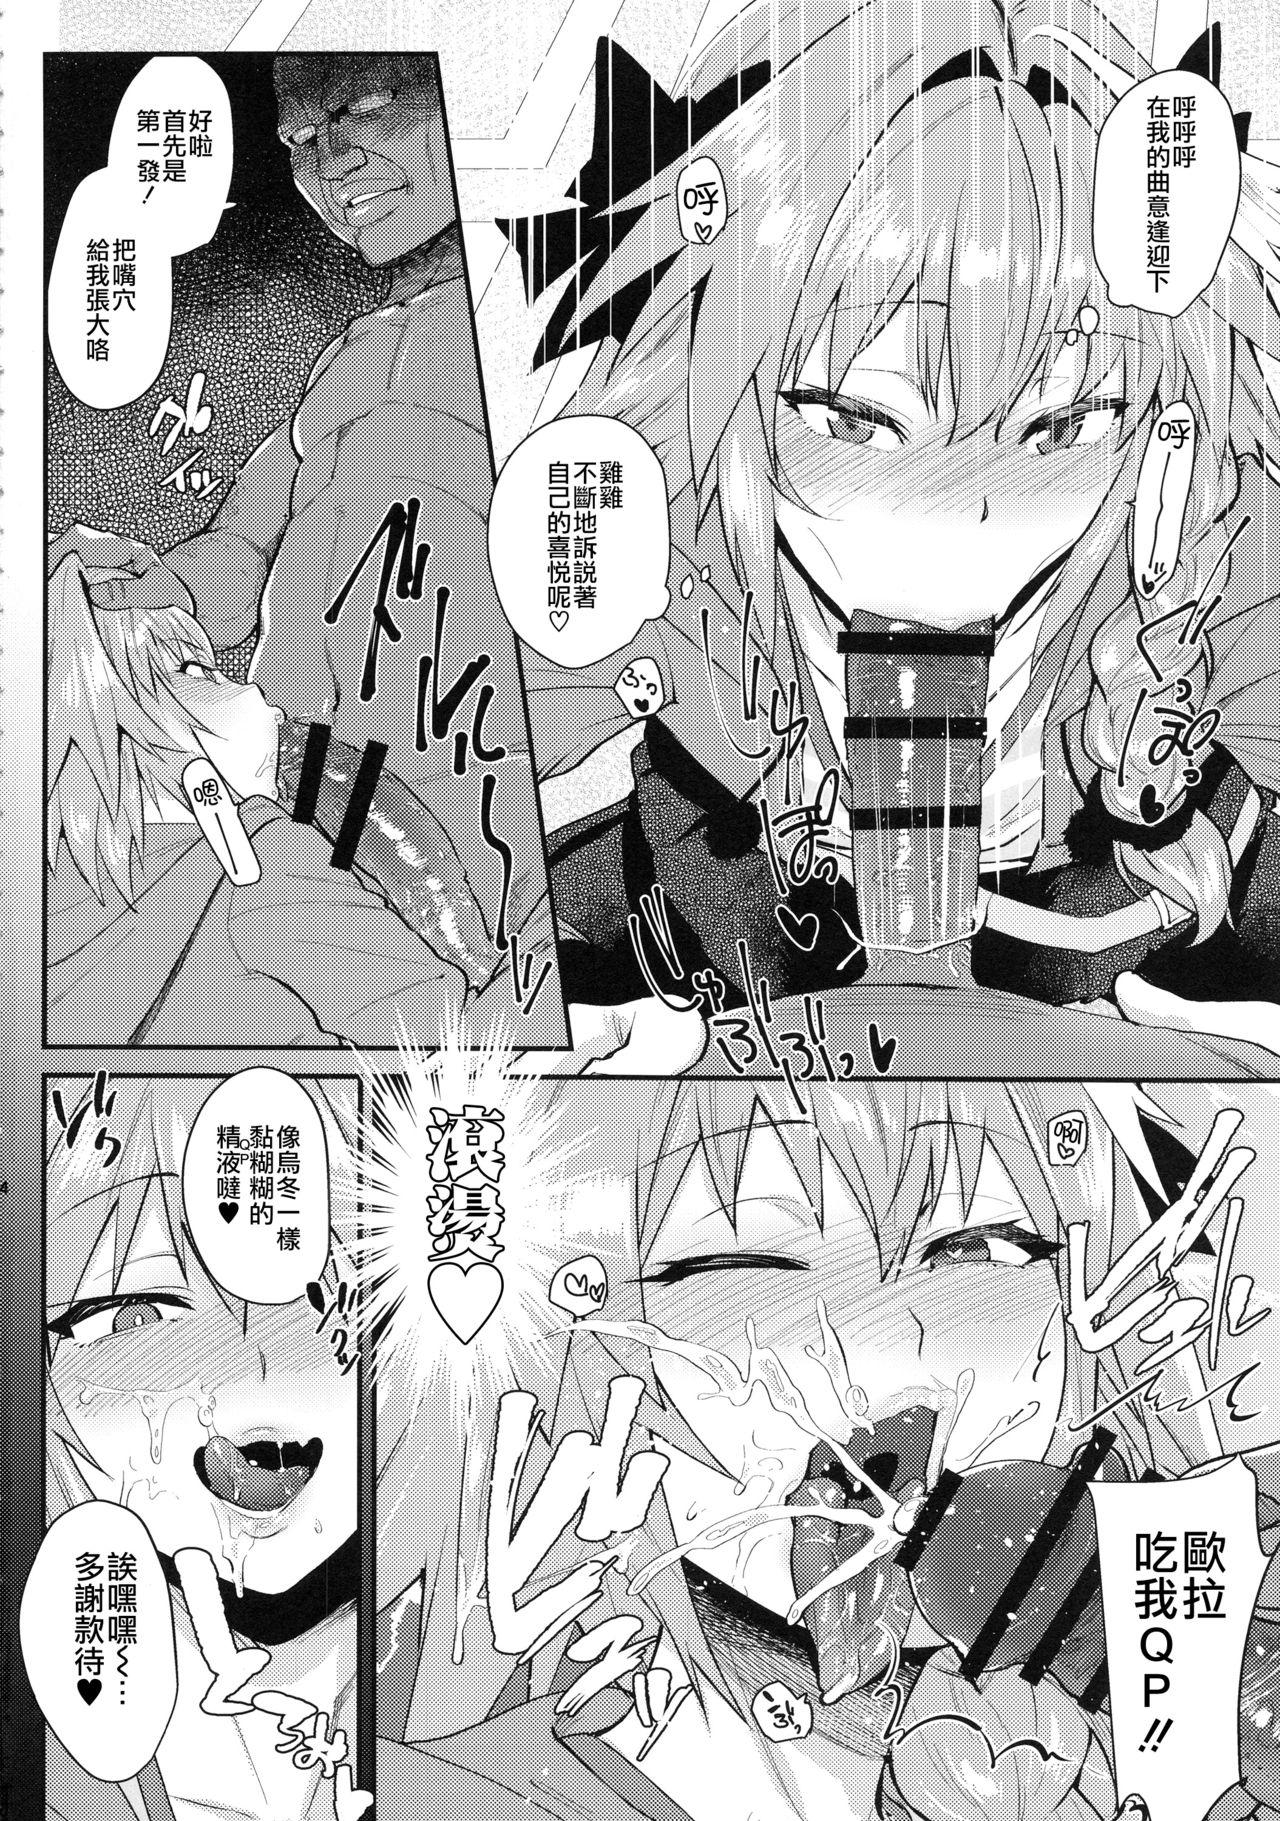 Mexicana 5000 Chou QP Hoshii! - Fate grand order Athletic - Page 6